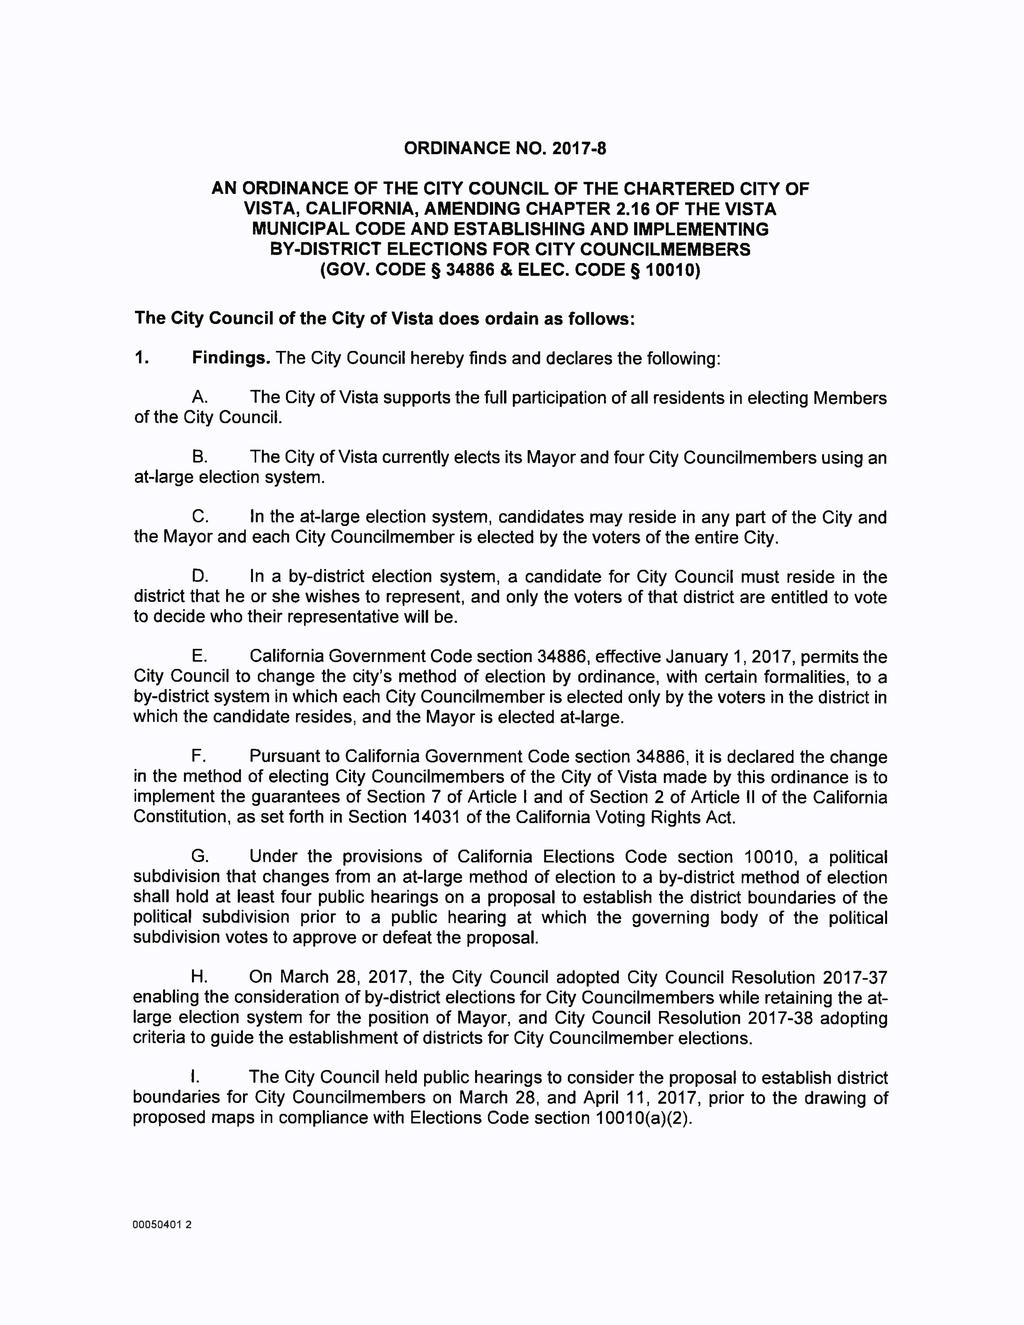 ORDINANCE NO. 2017-8 AN ORDINANCE OF THE CITY COUNCIL OF THE CHARTERED CITY OF VISTA, CALIFORNIA, AMENDING CHAPTER 2.